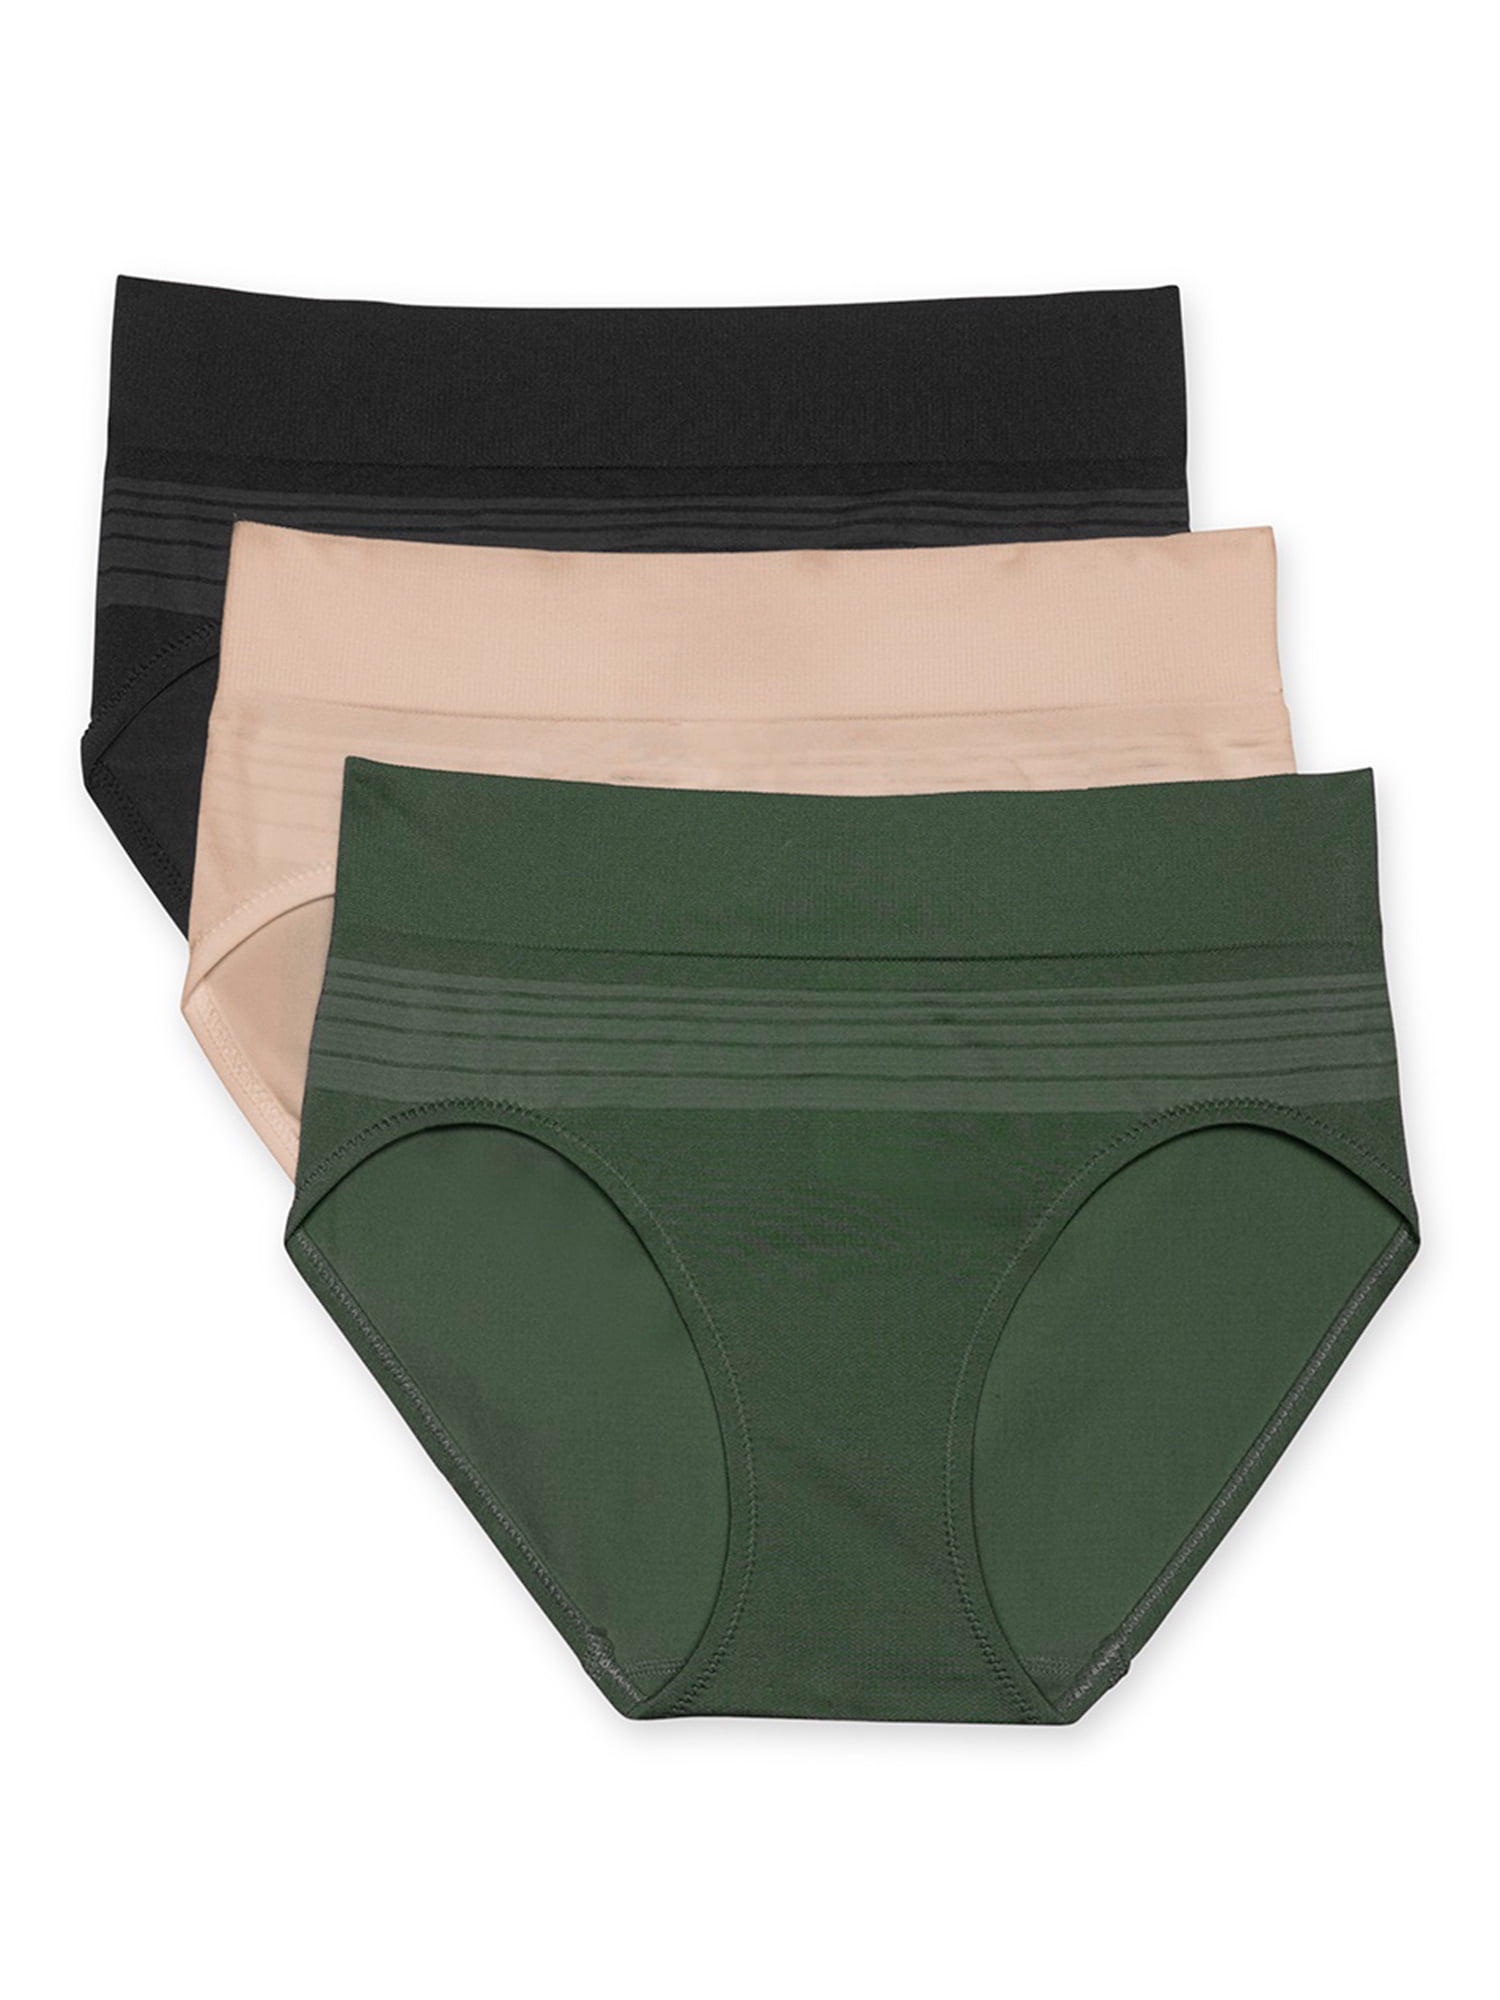 Warners Blissful Benefits Dig-Free Seamless Hipster 3-Pack RU7323W 